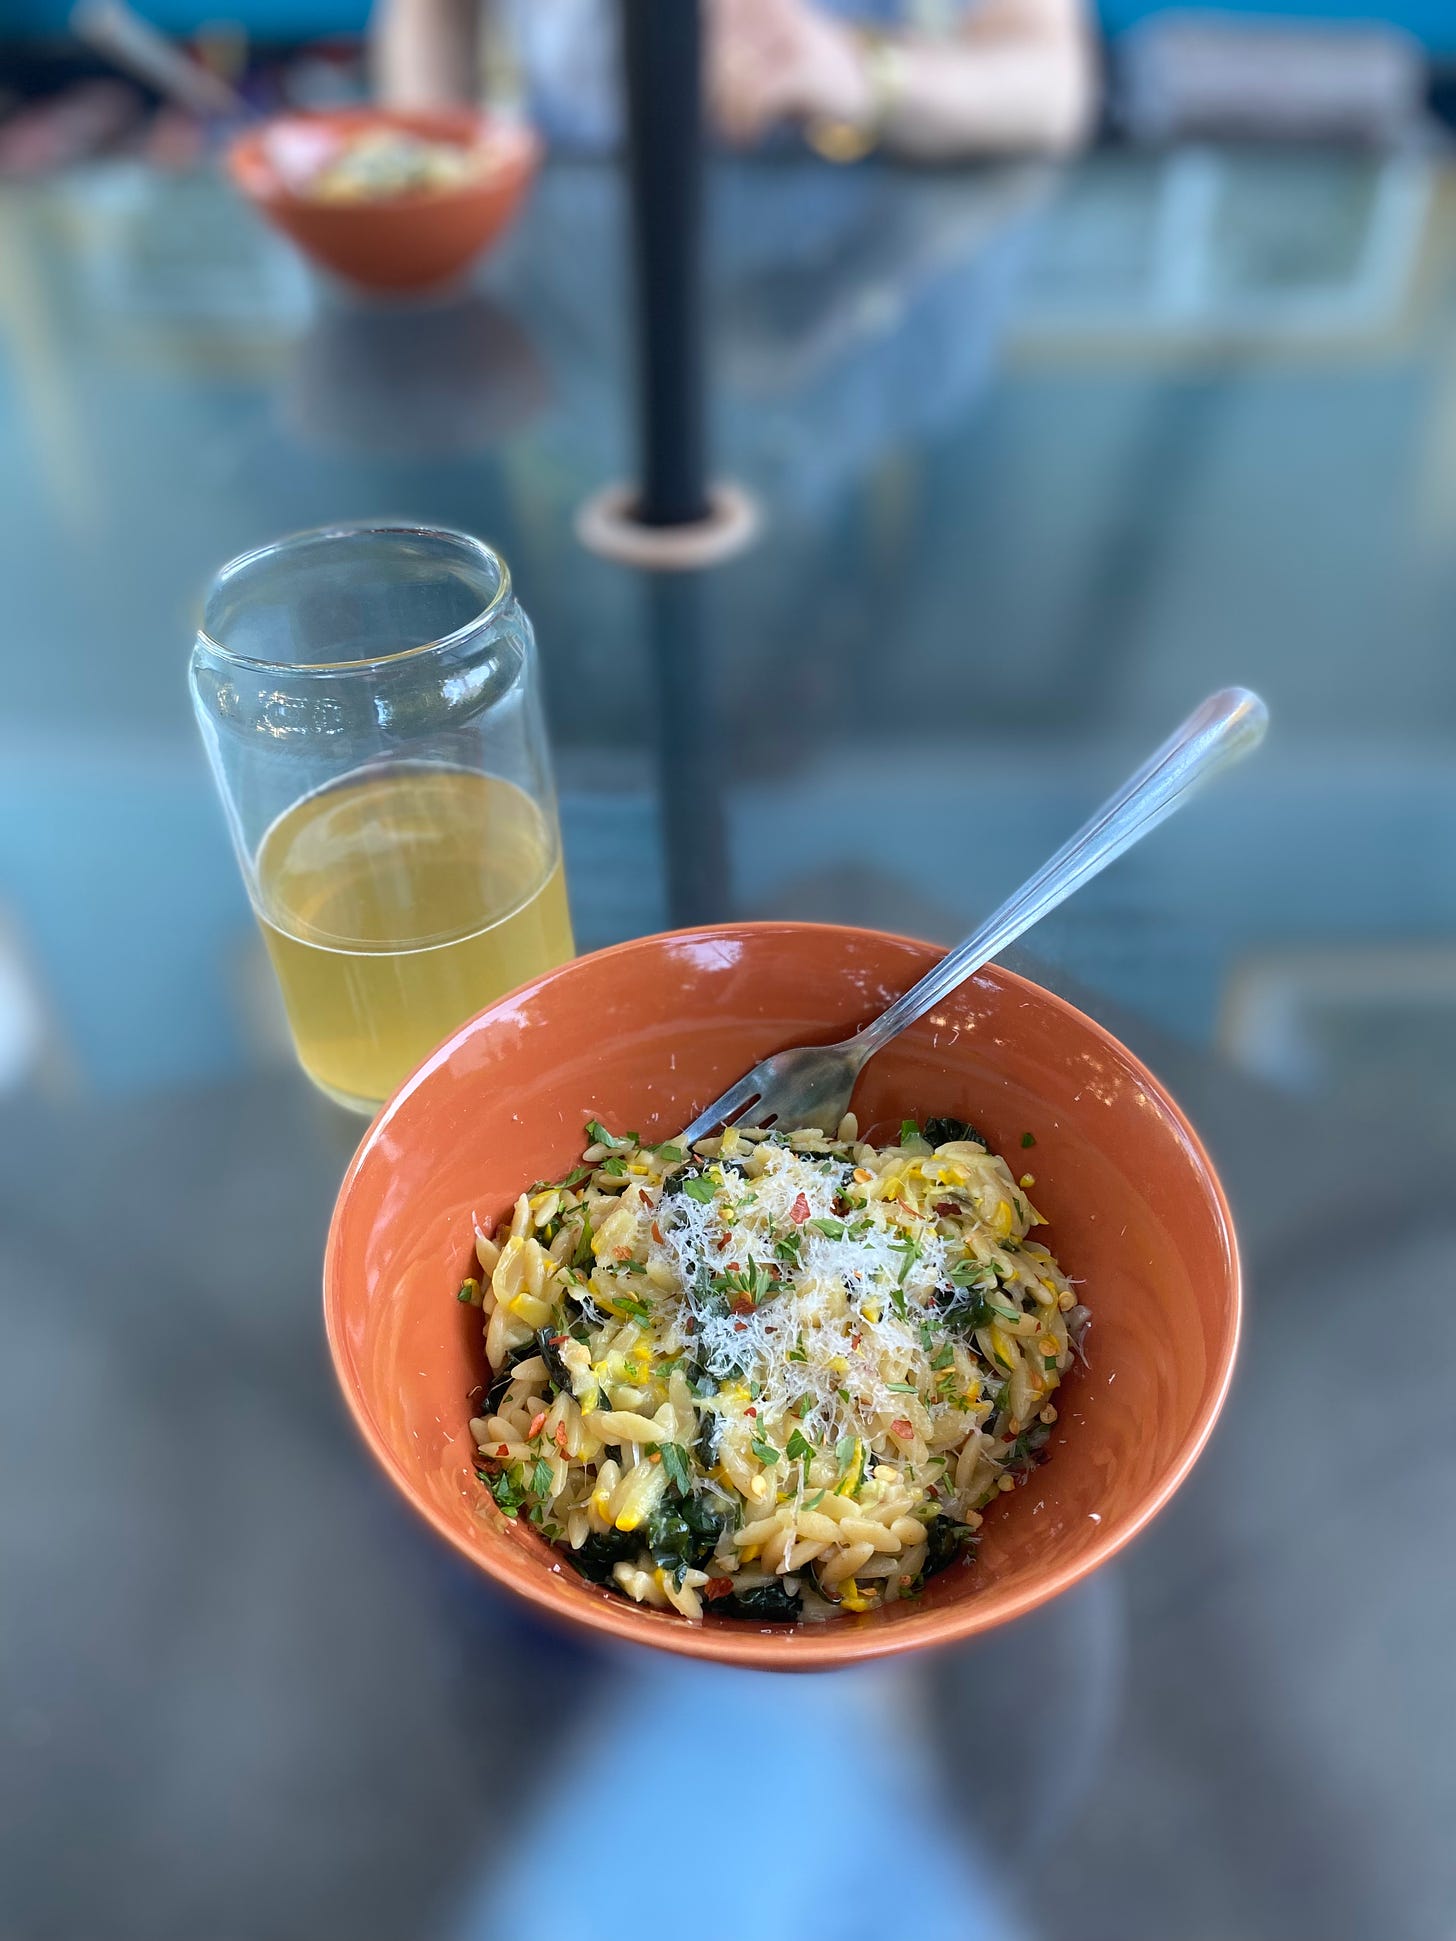 An orange bowl of the orzo described above, dusted with parmesan and chili flakes. A fork sticks out at the back of the bowl, and next to it is a pint glass of pale ale.